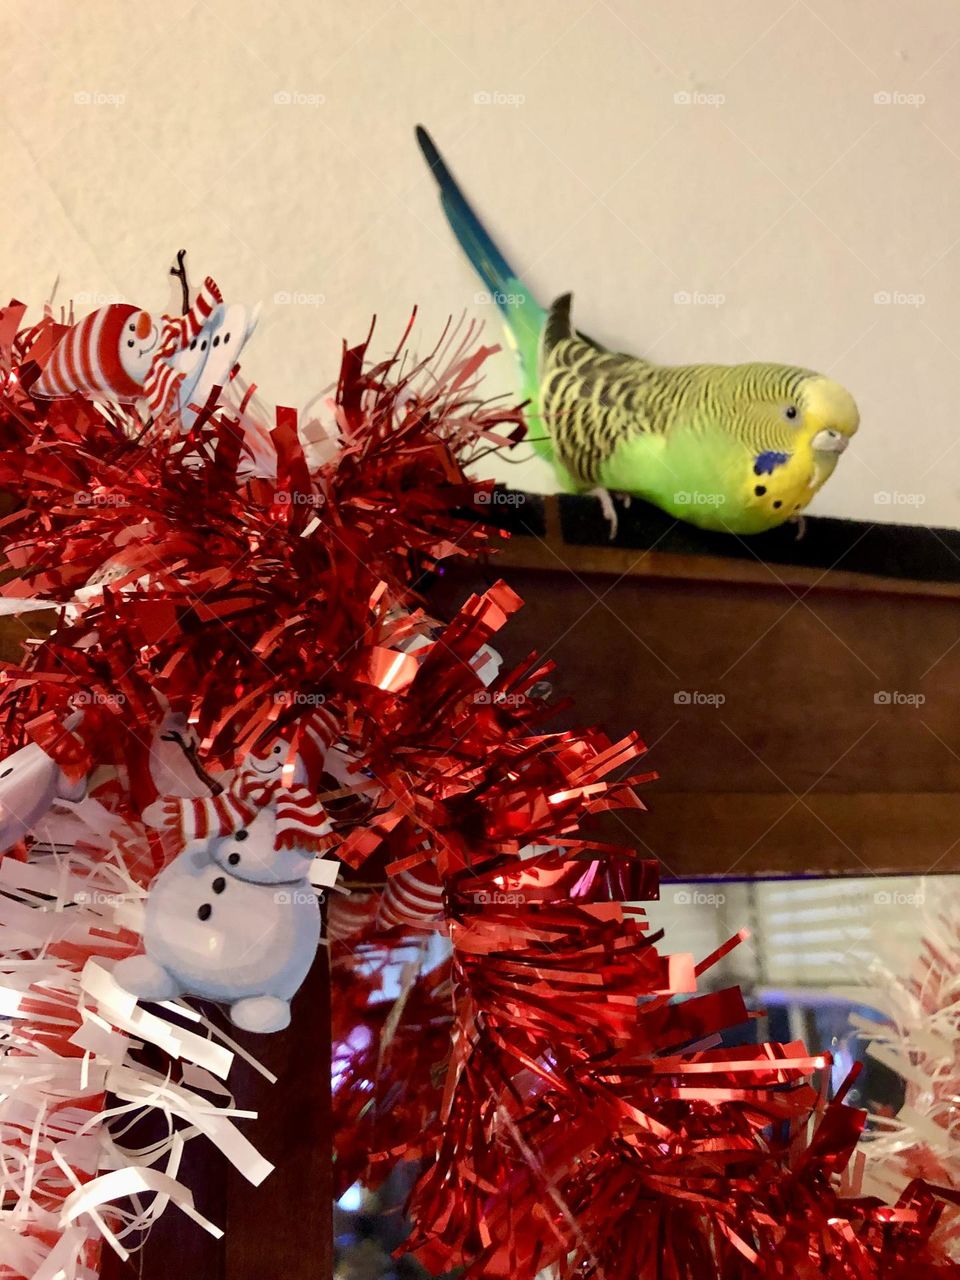 Coco loves  the  Christmas decorations / parquets 🦜 